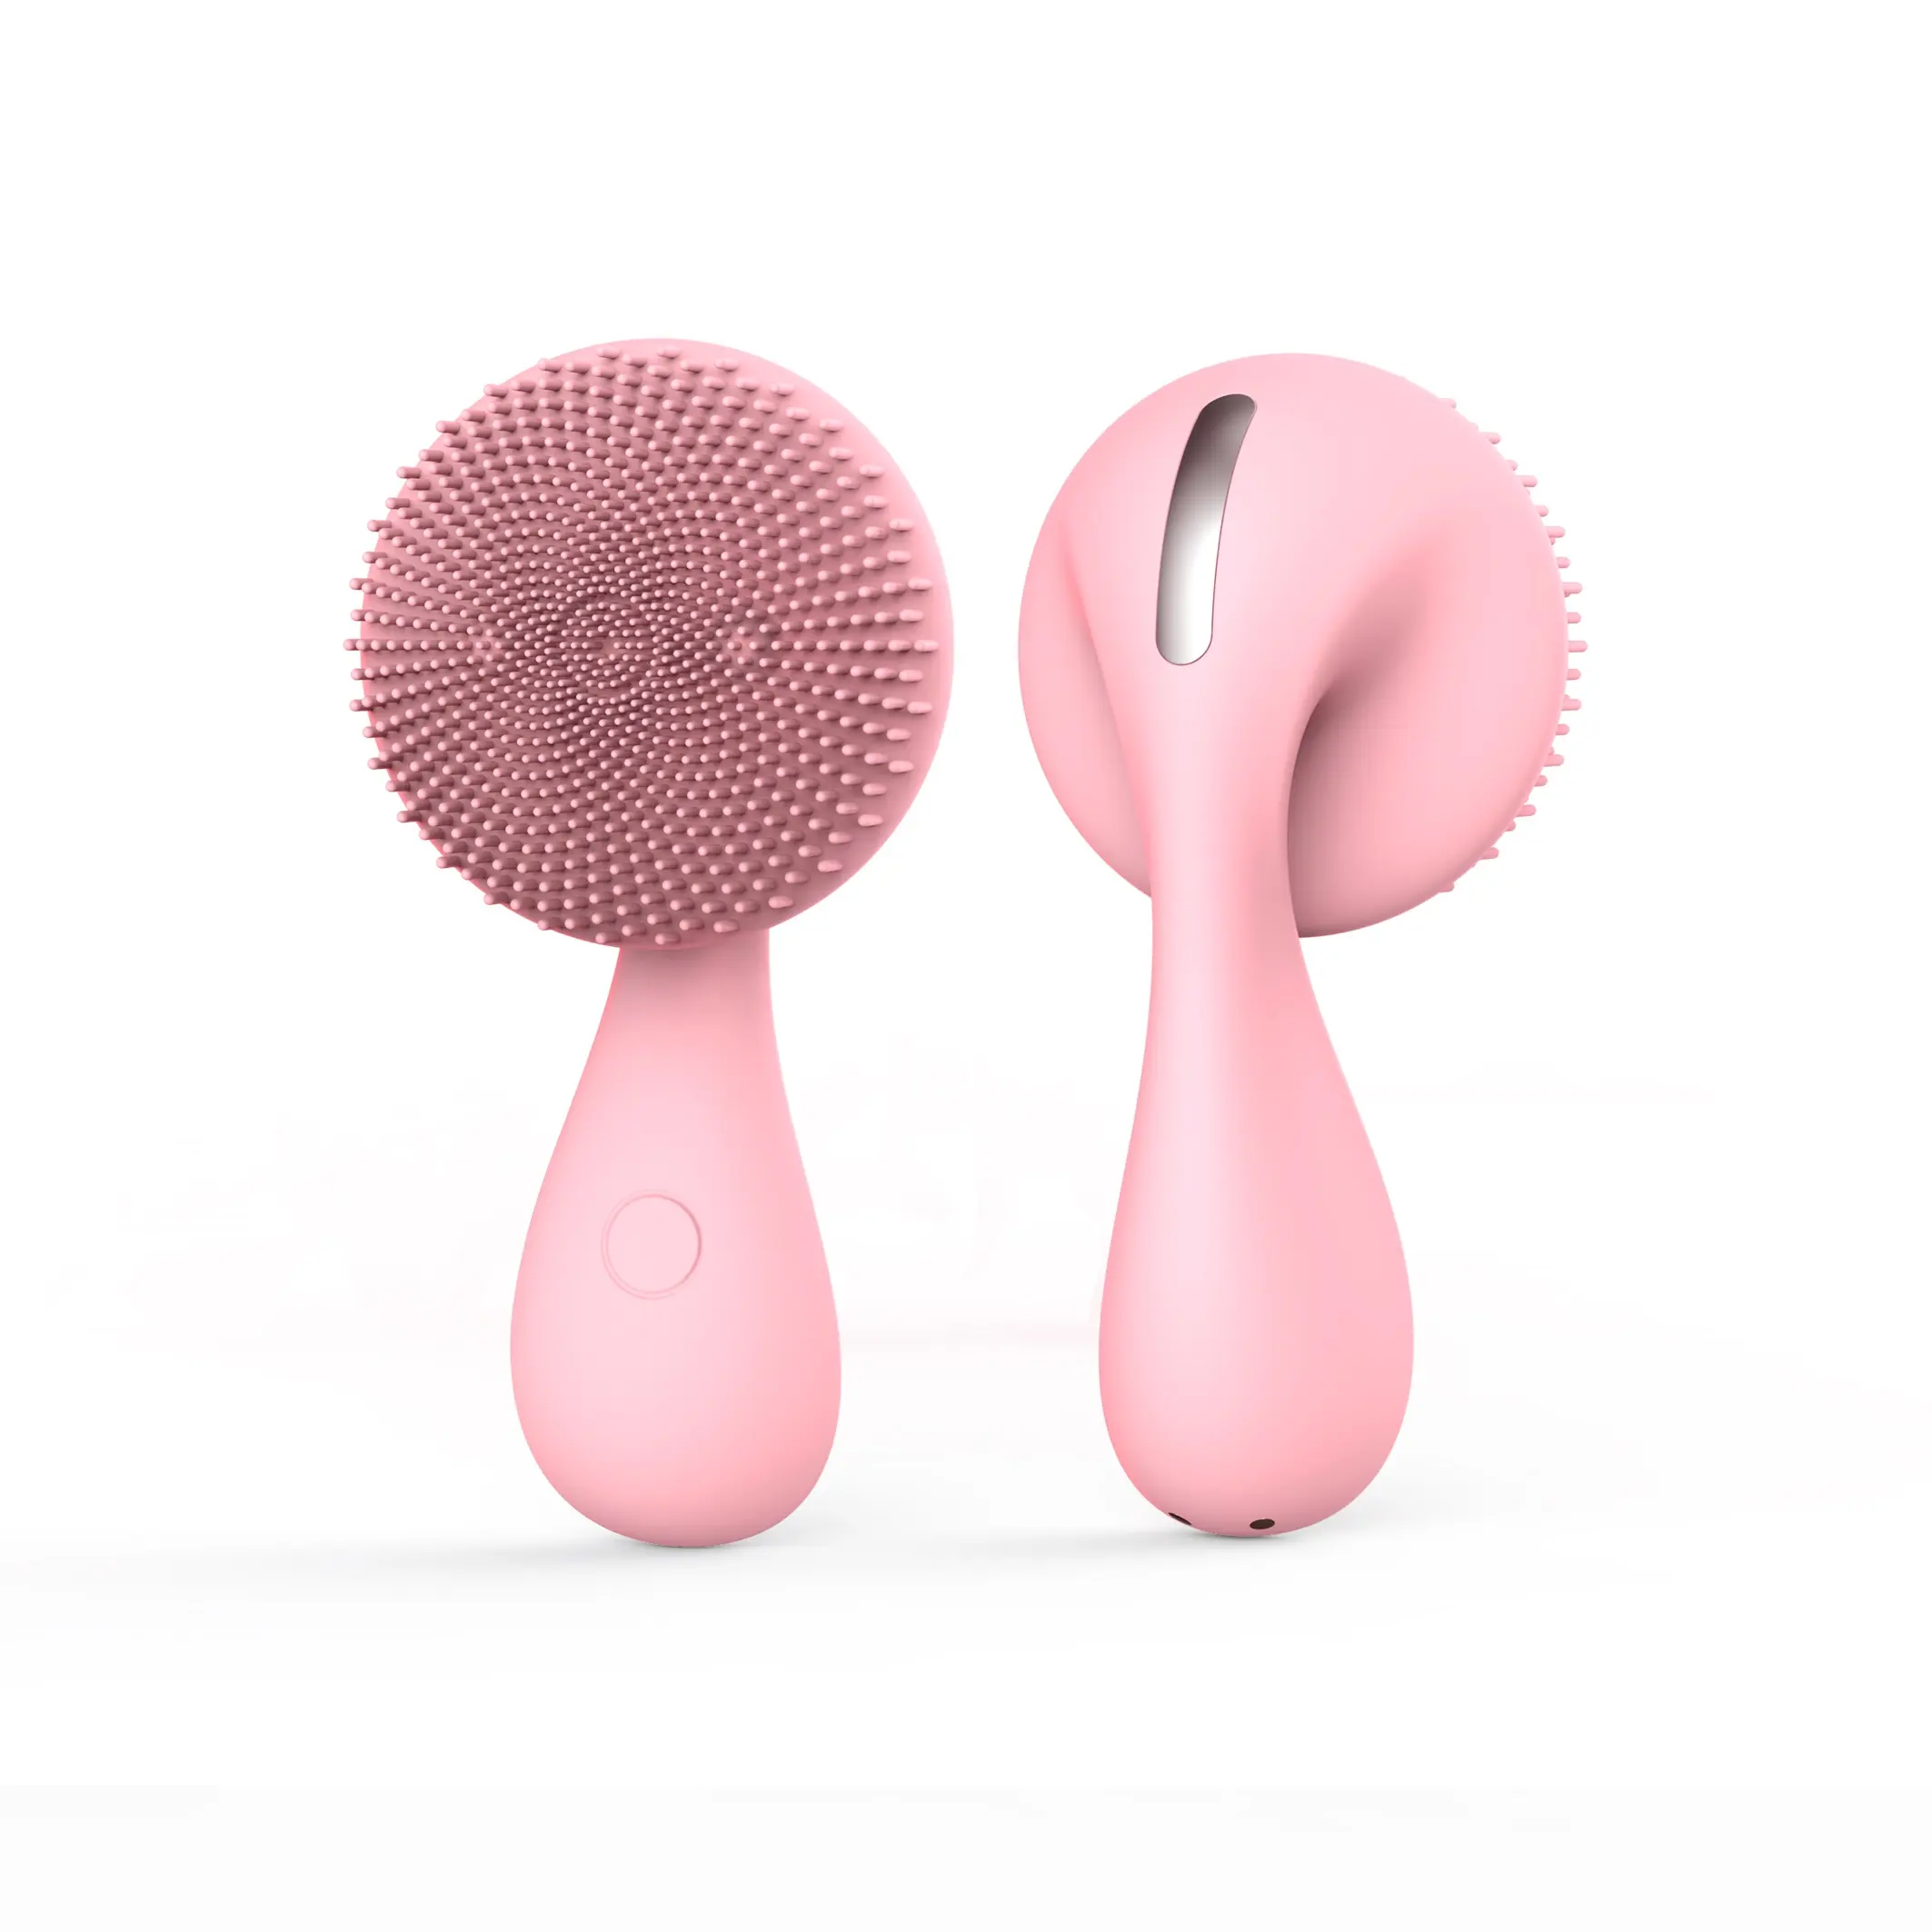 Ruyi Design Rotation Function Silicone Face Mask Brush Facial Pore Cleaner Silicone Facial Cleansing Brush